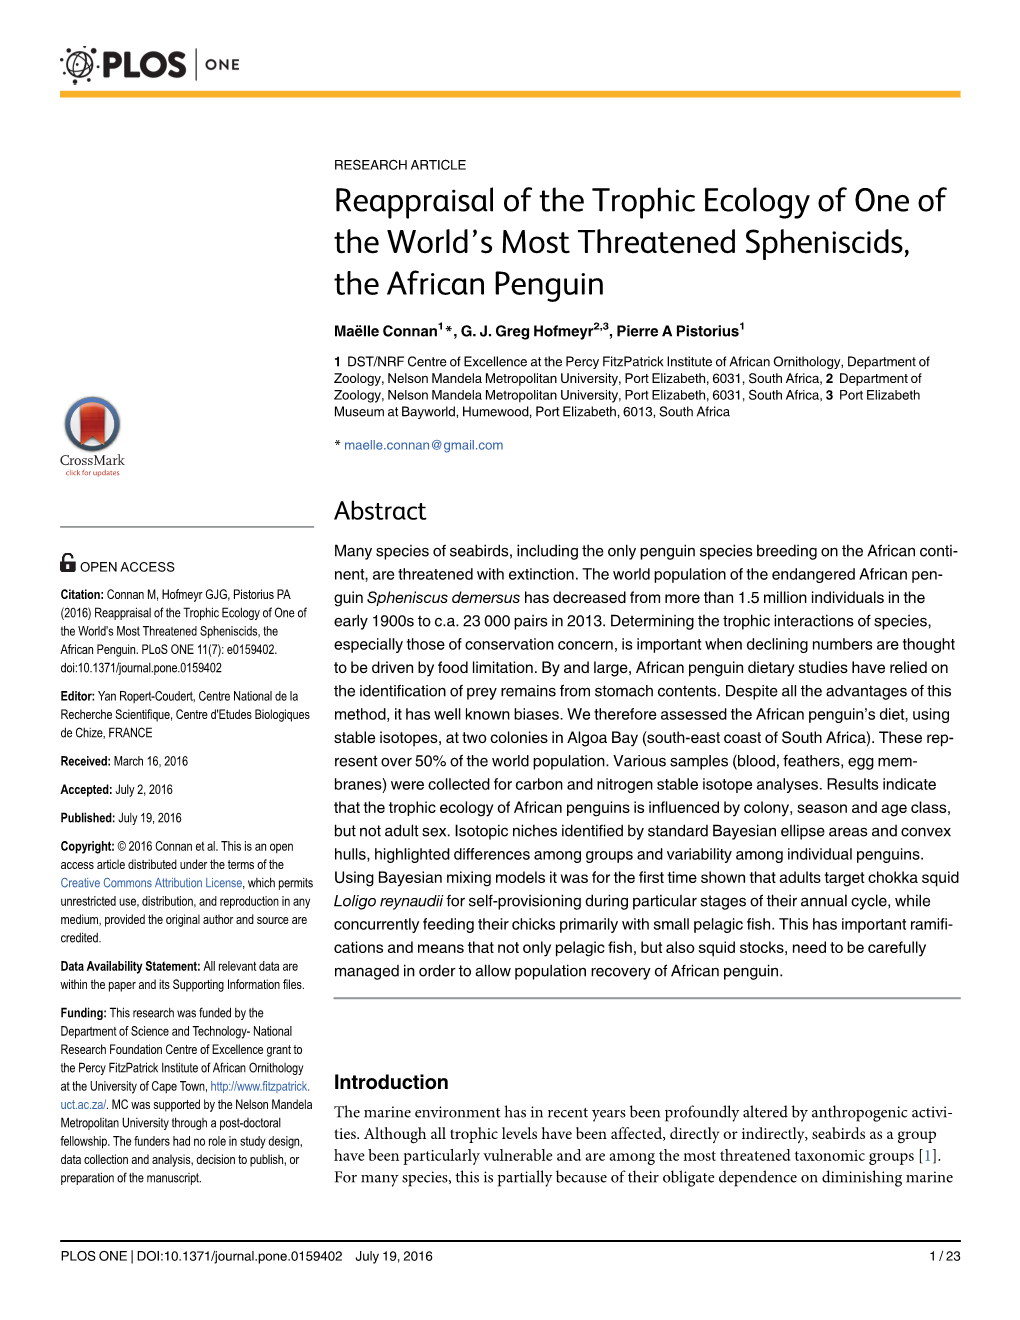 Reappraisal of the Trophic Ecology of One of the World's Most Threatened